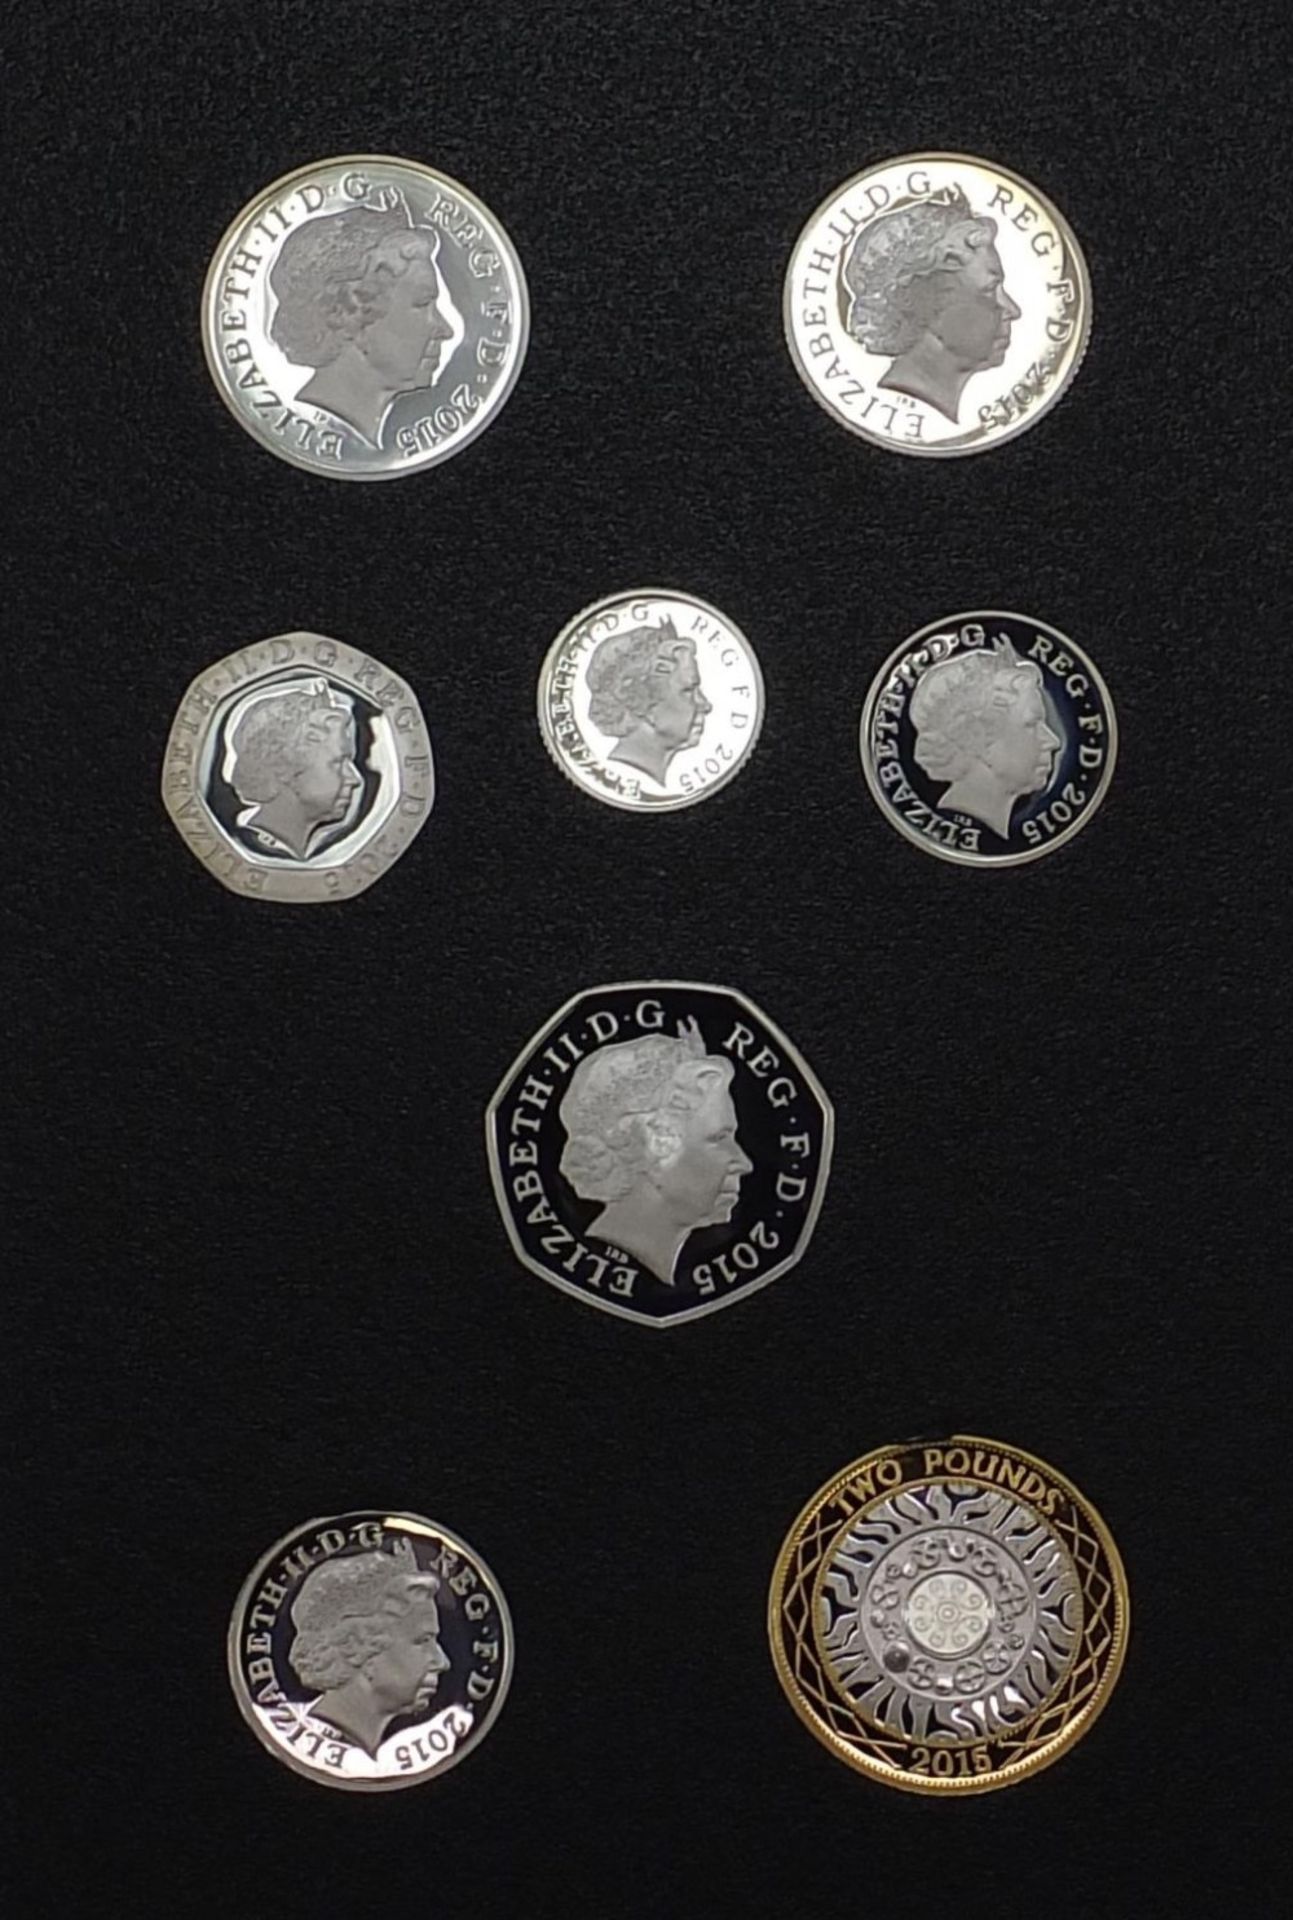 The Fifth Circulating Coin Portrait First and Final editions silver proof coin set with fitted - Image 3 of 8